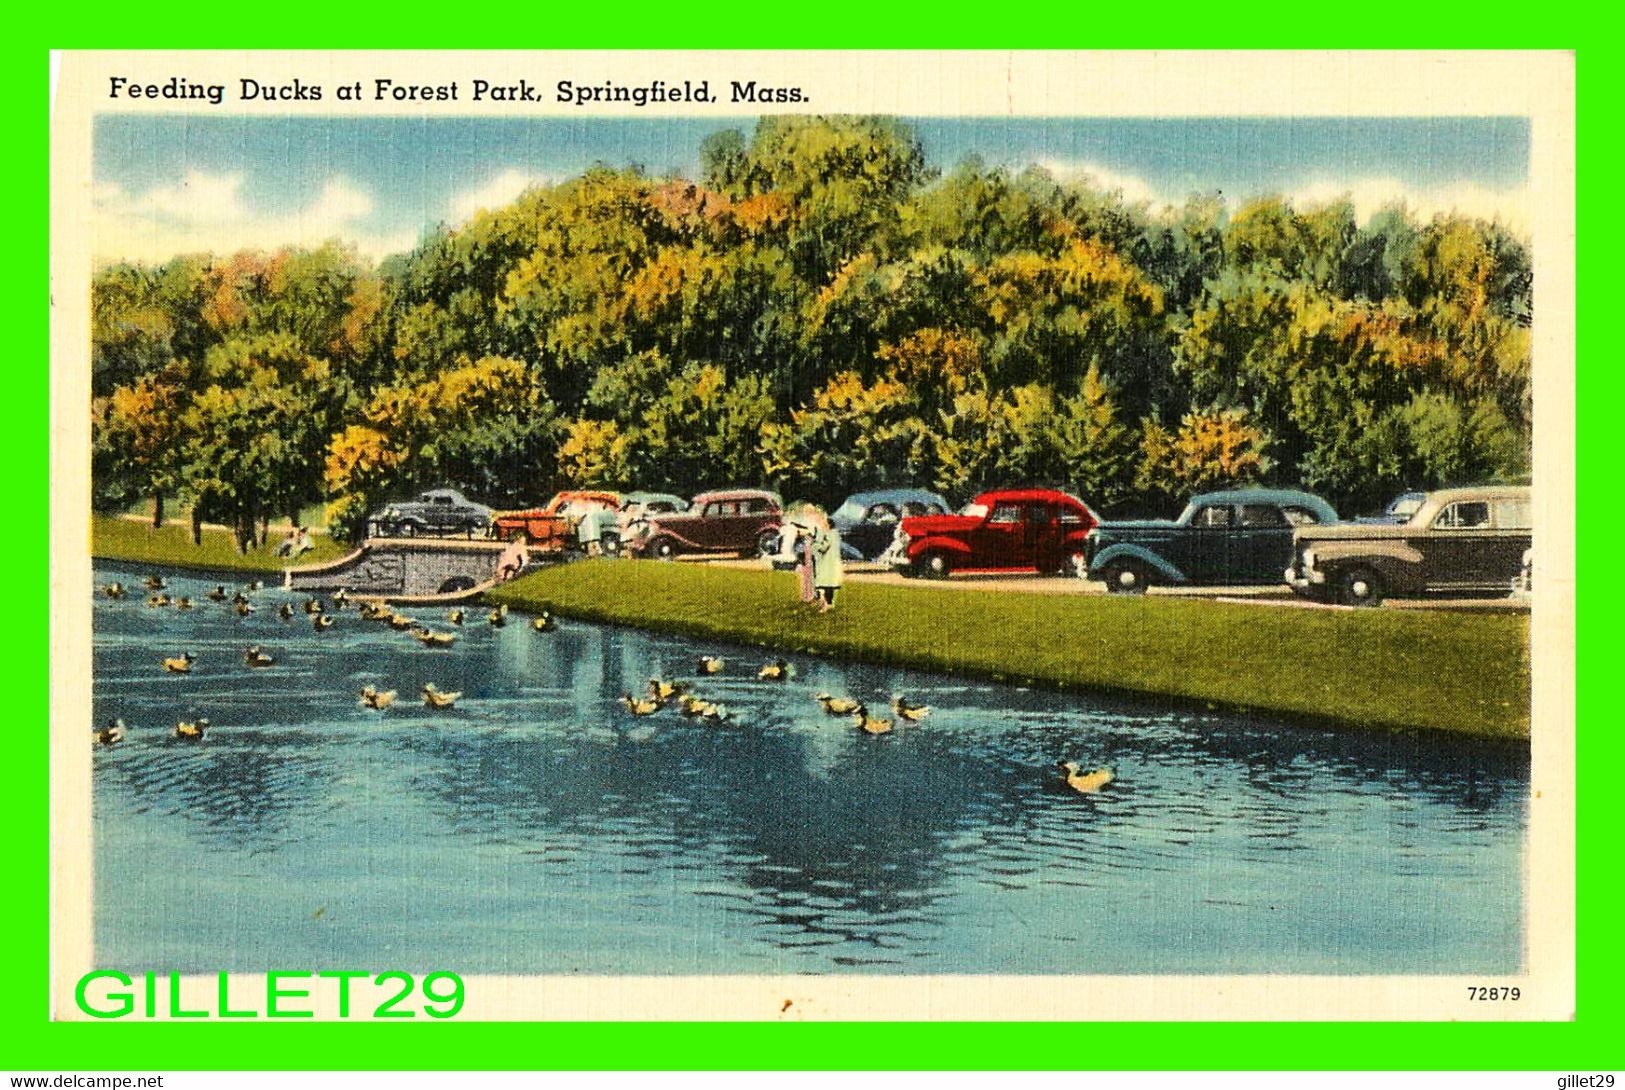 SPRINGFIELD, MA - FEEDING DUCKS AT FOREST PARK - ANIMATED WITH PEOPLES & OLD CARS - THE UNION NEWS CO - - Springfield